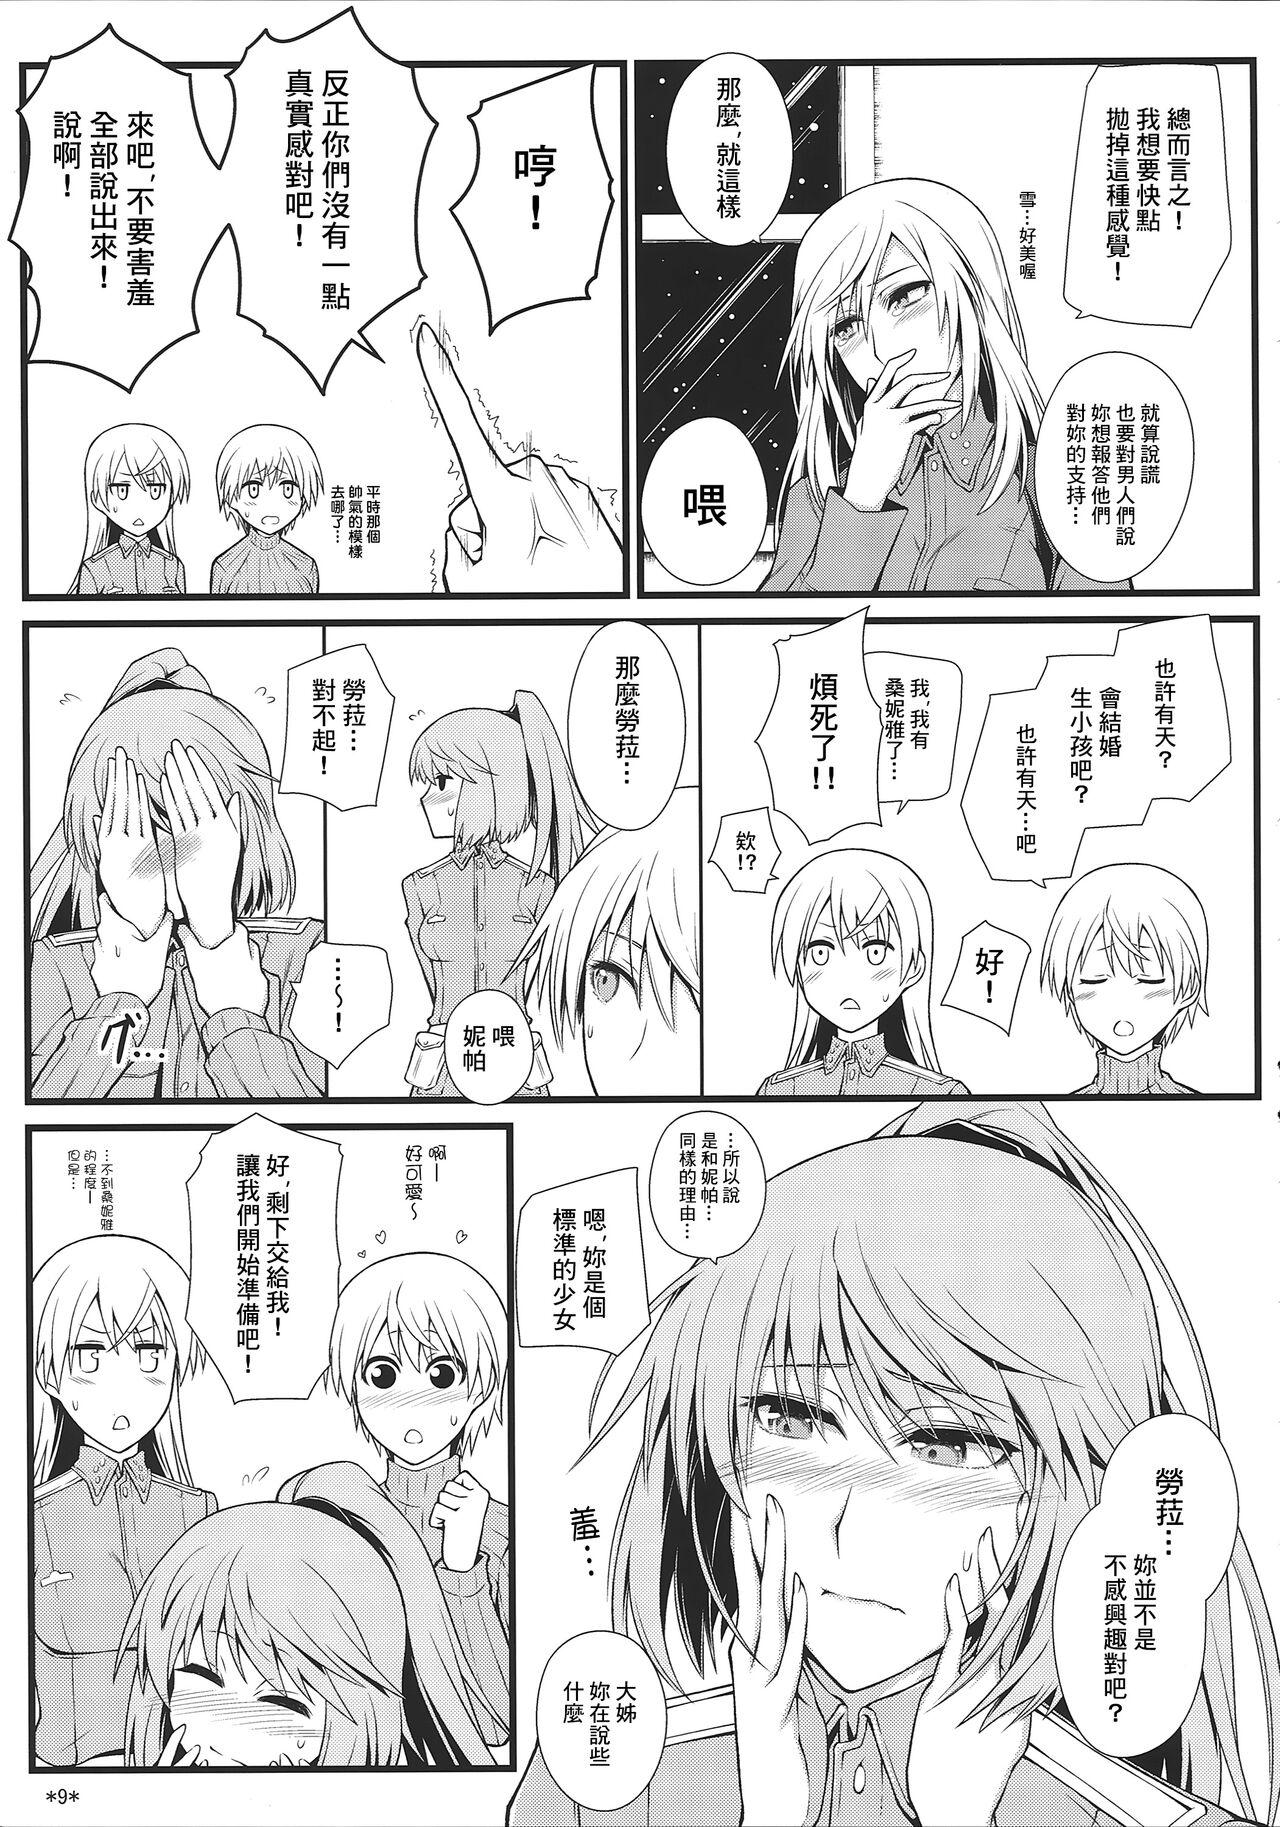 Camwhore KARLSLAND SYNDROME 3 - Strike witches Online - Page 11